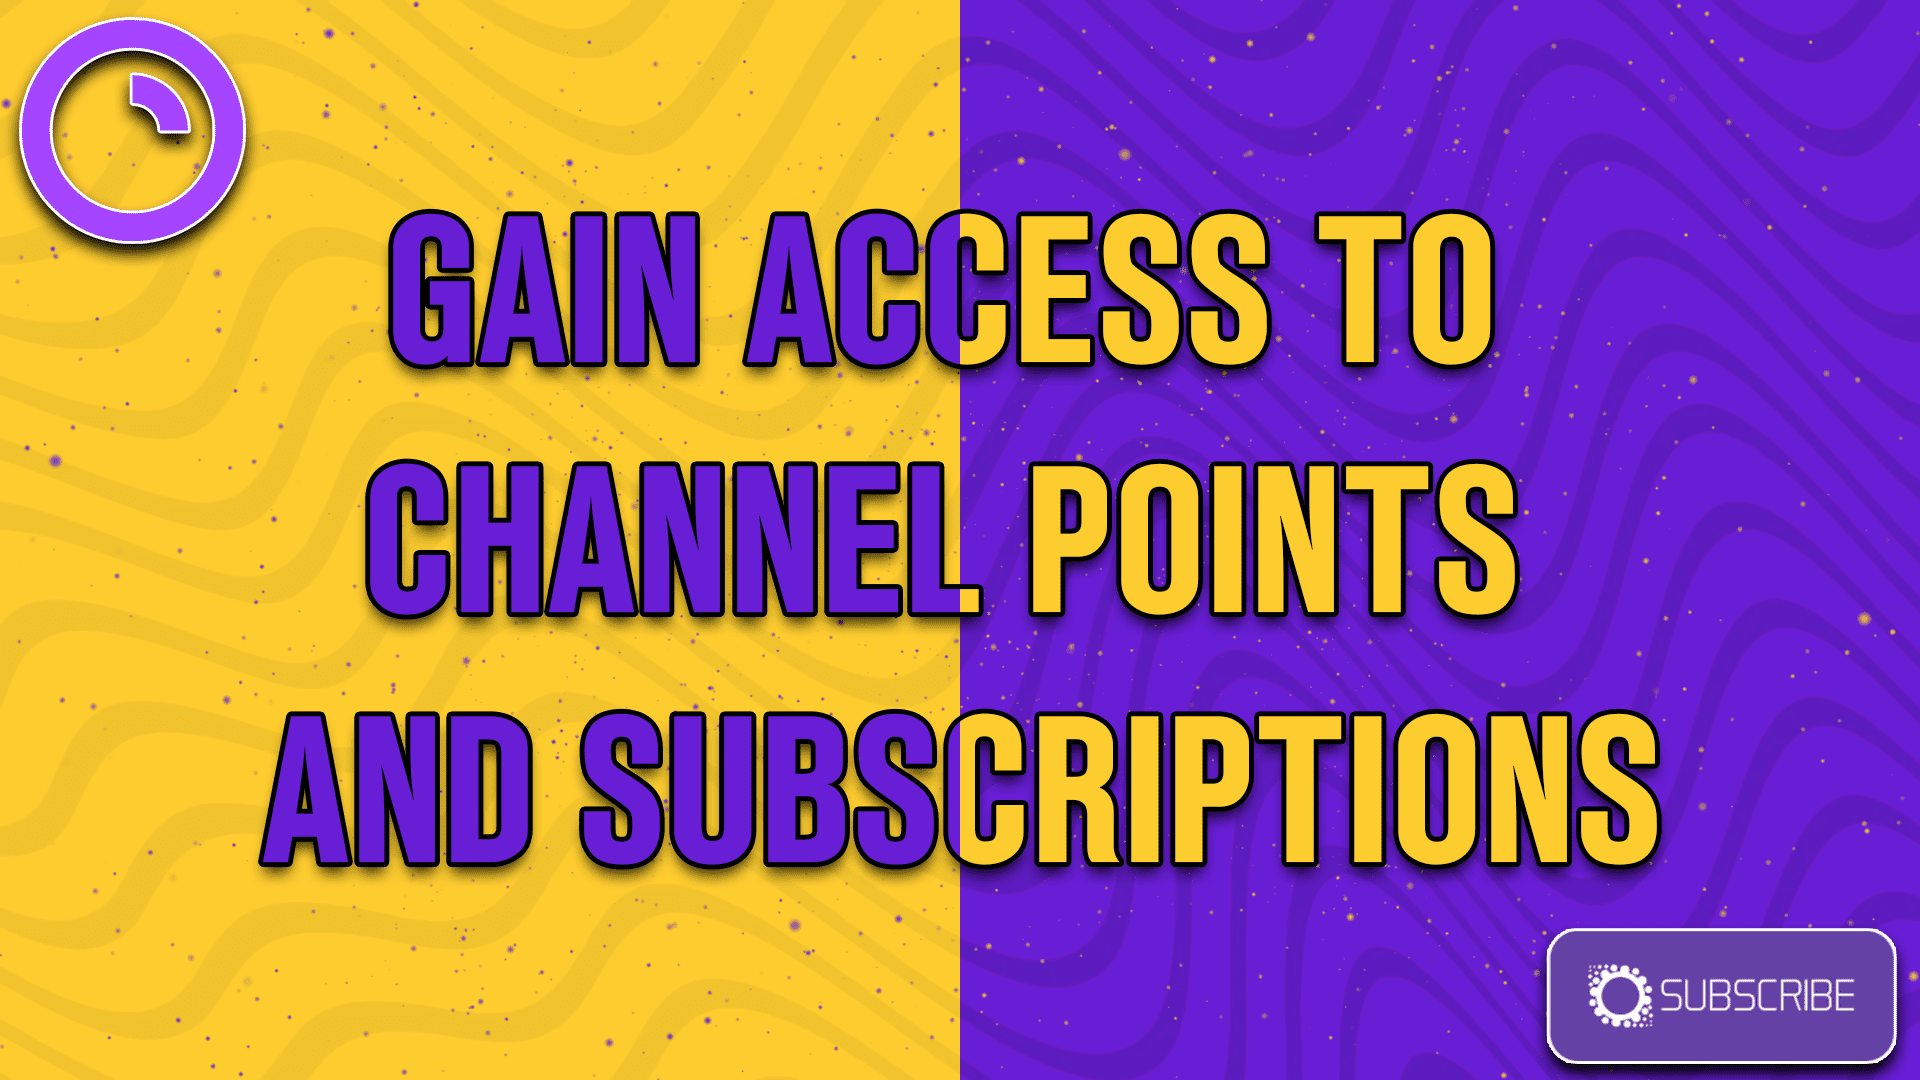 The access to Channel points and Subscriptions - StreamBee